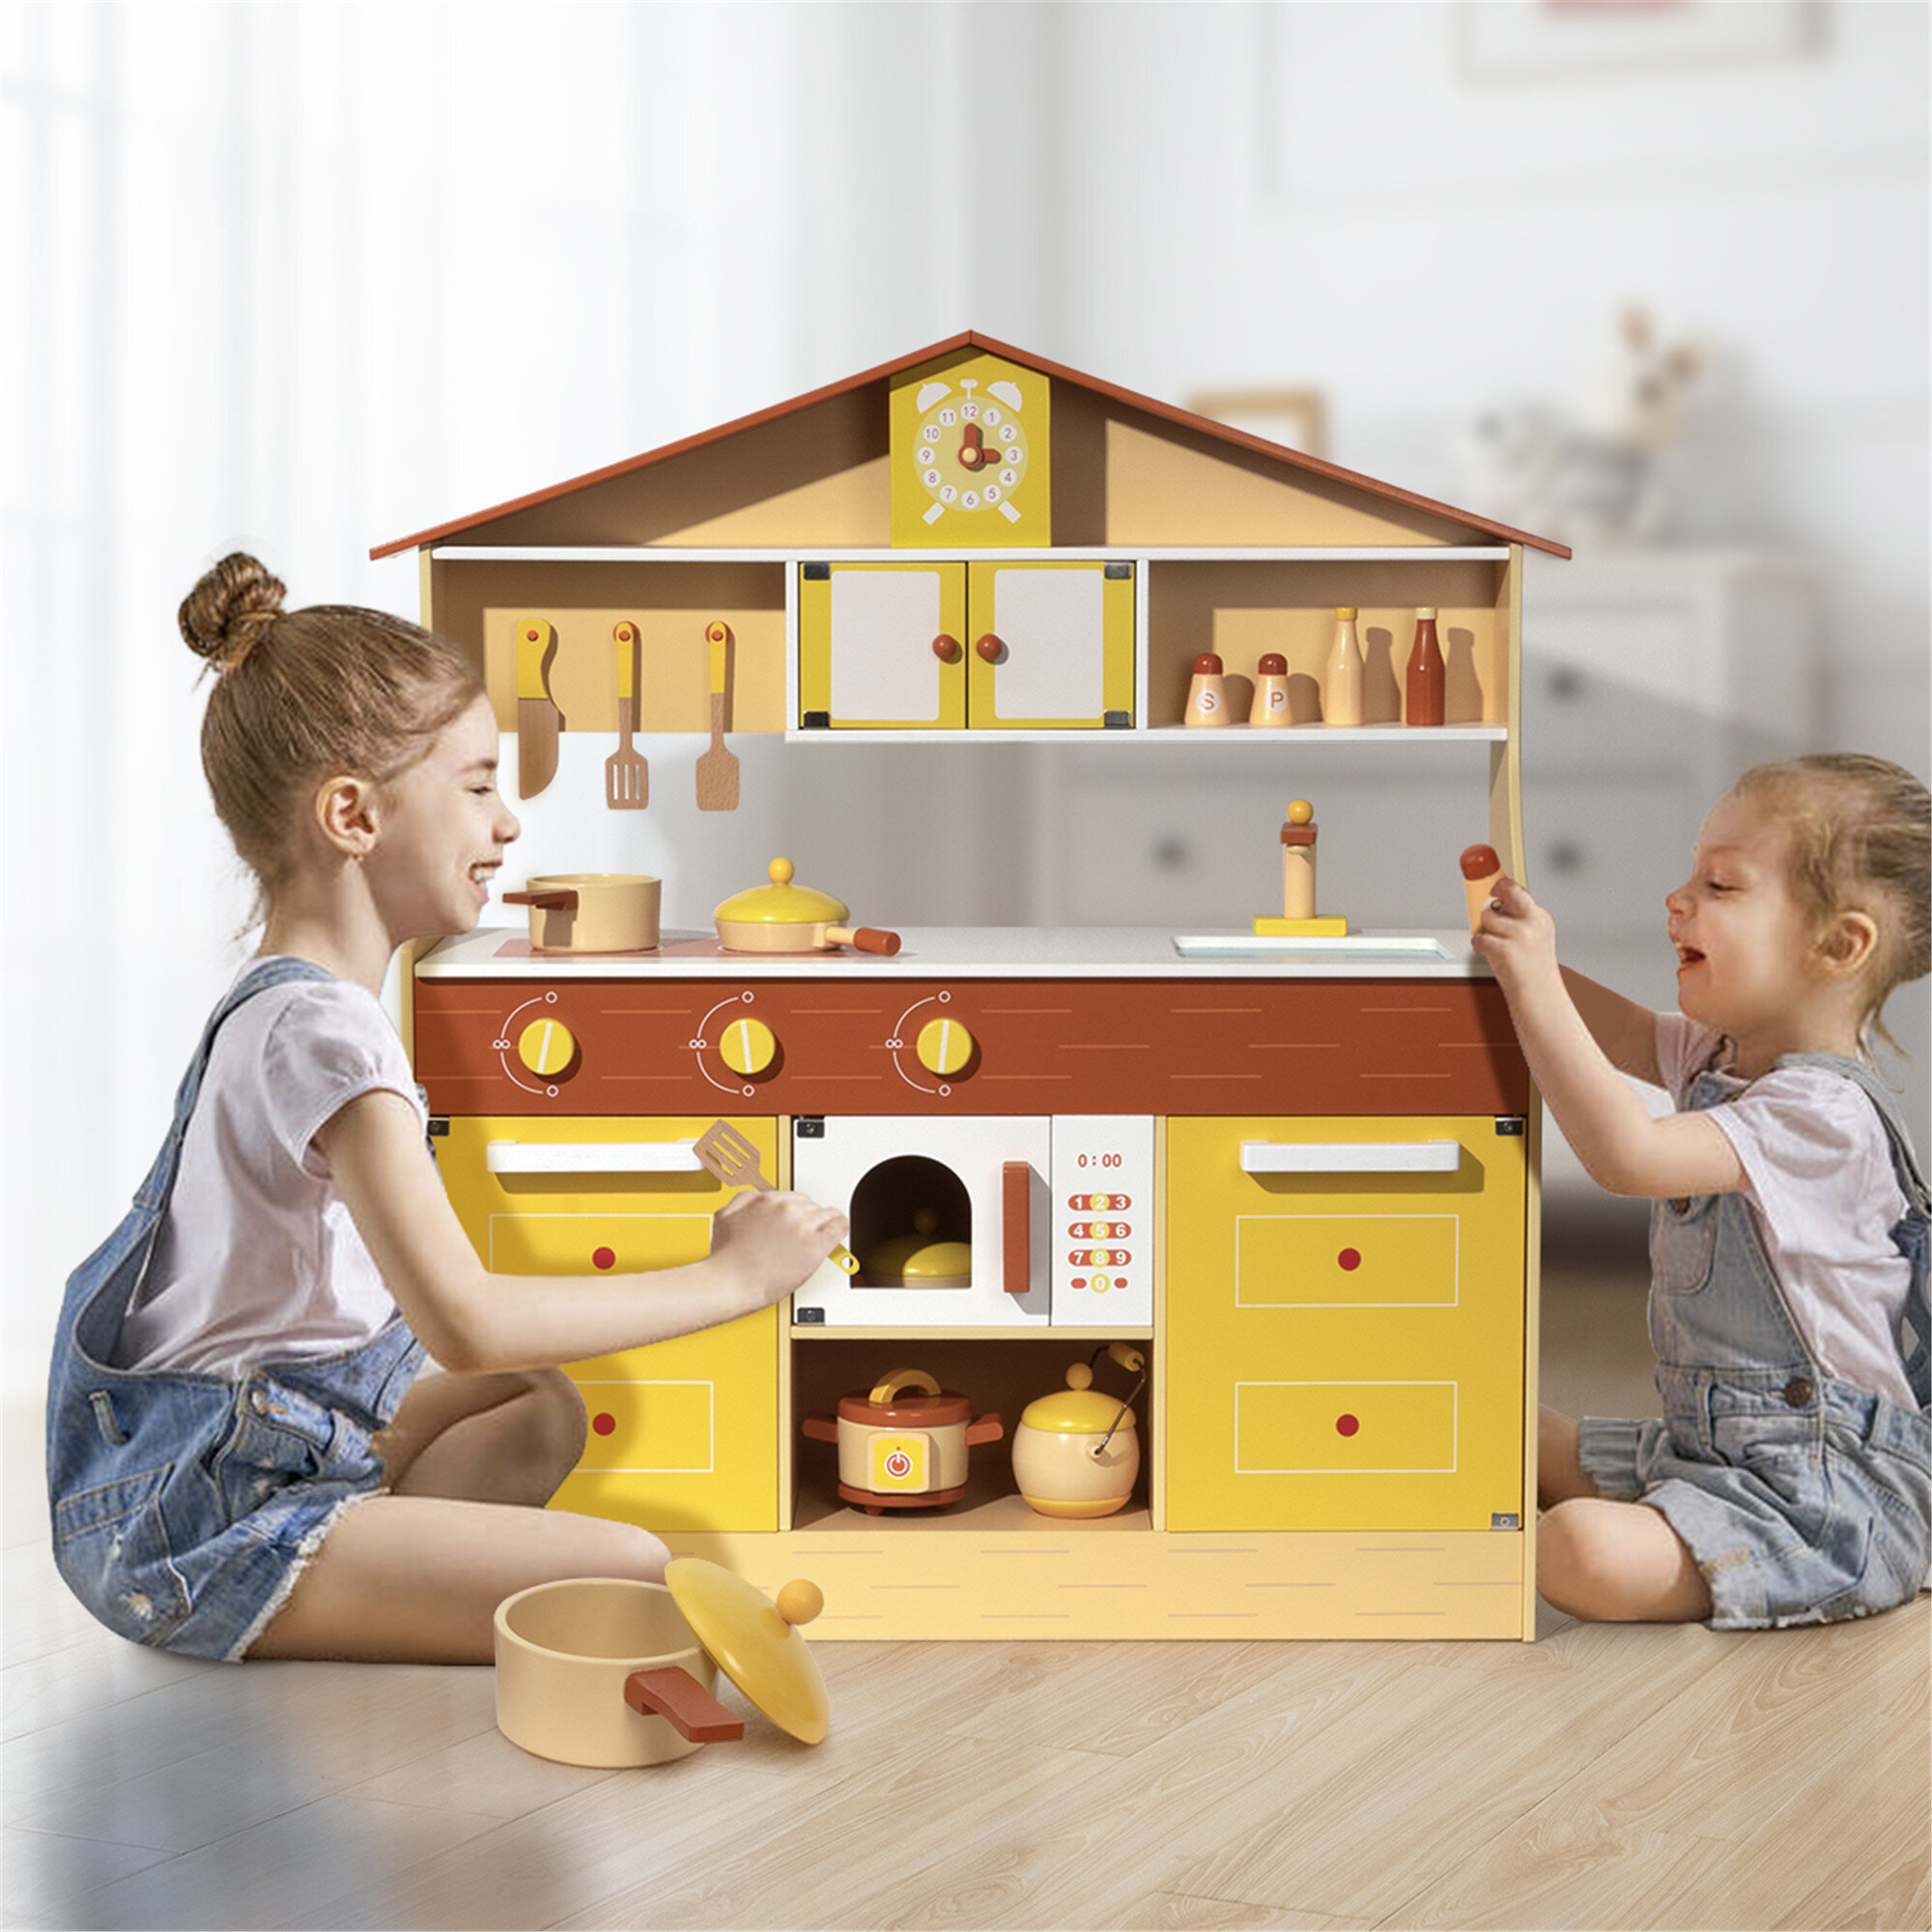 Play Kitchen Kids Kitchen Playset Play Kitchen For Toddlers